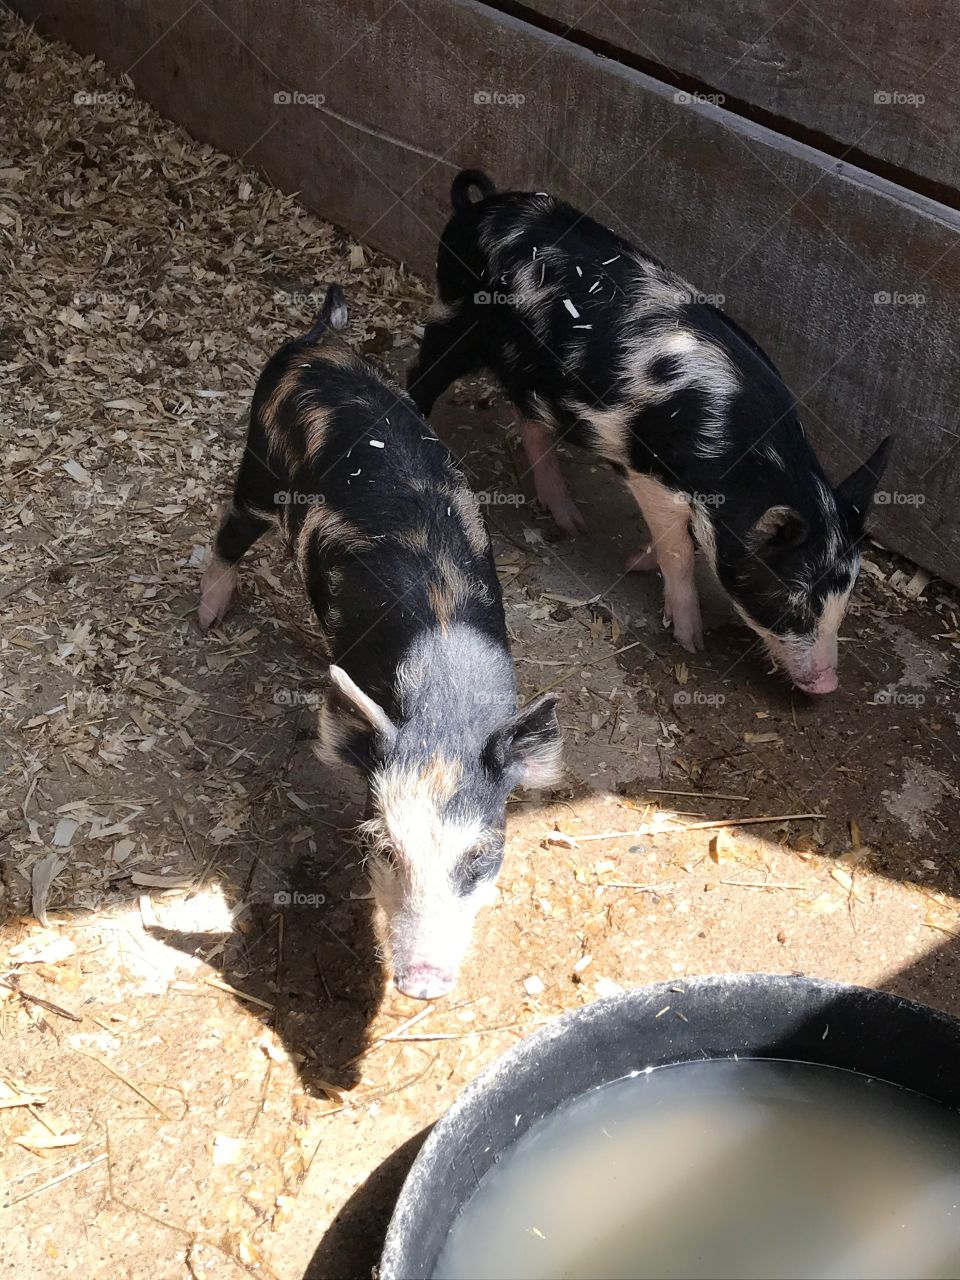 Adorable Spotted Baby Piglets - Sunny Day Out on the Farm - Rustic Country Livestock - Cute Pigs in Pen 